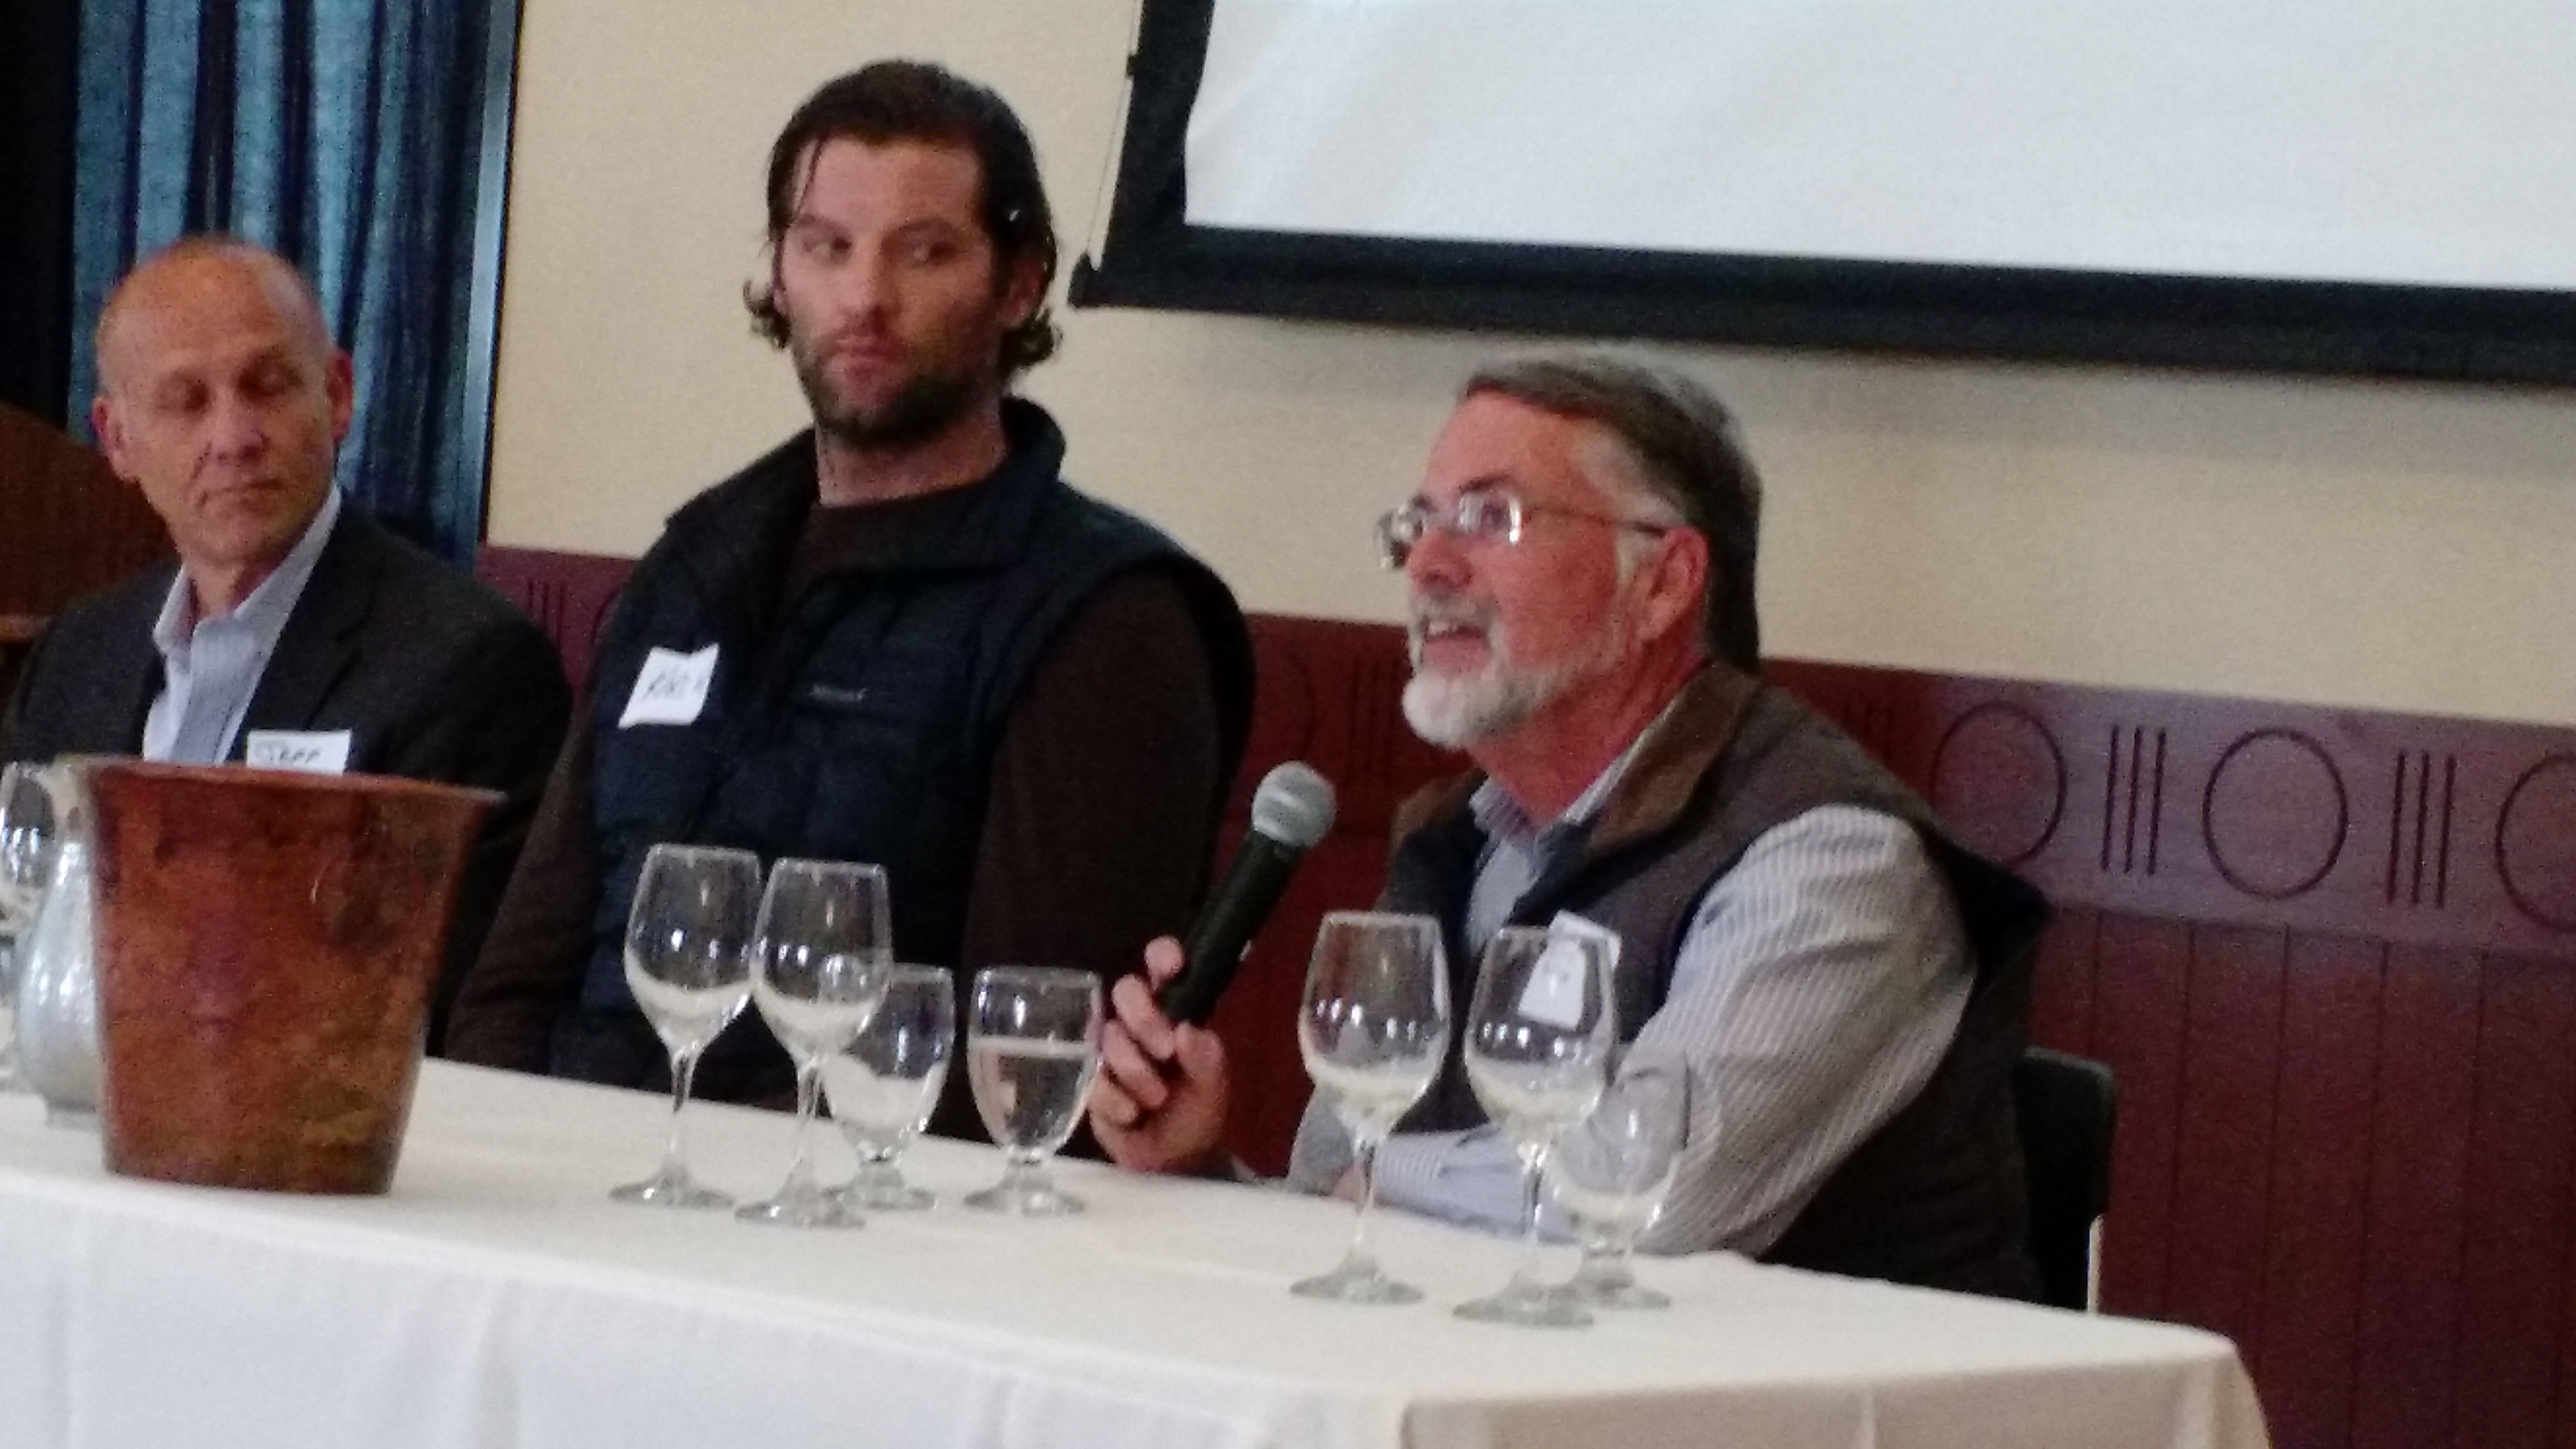 California winemakers and growers discuss Sauv Blanc